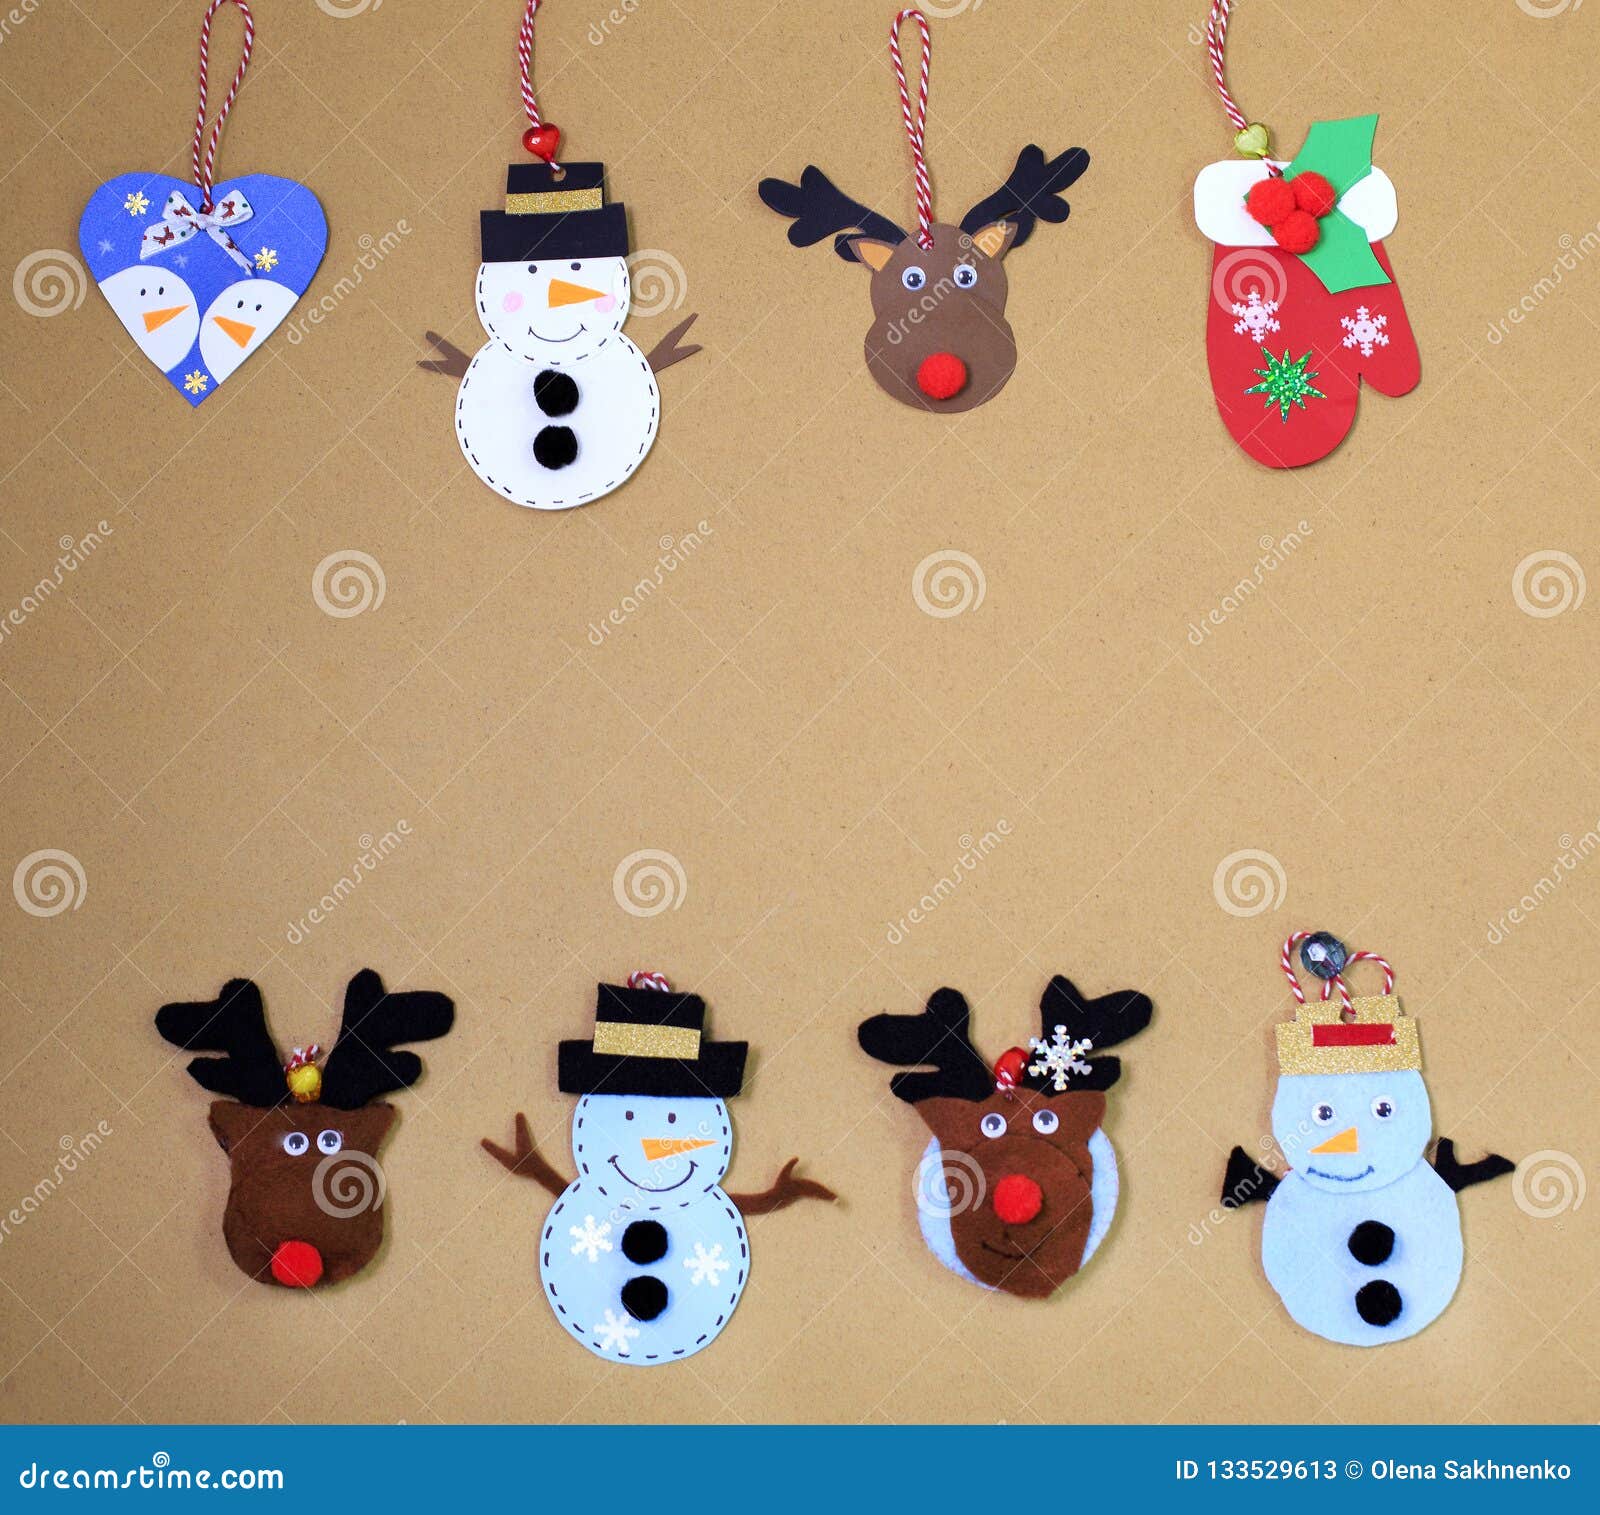 Homemade Christmas Toys and Christmas Tree Decorations on a Wooden ...